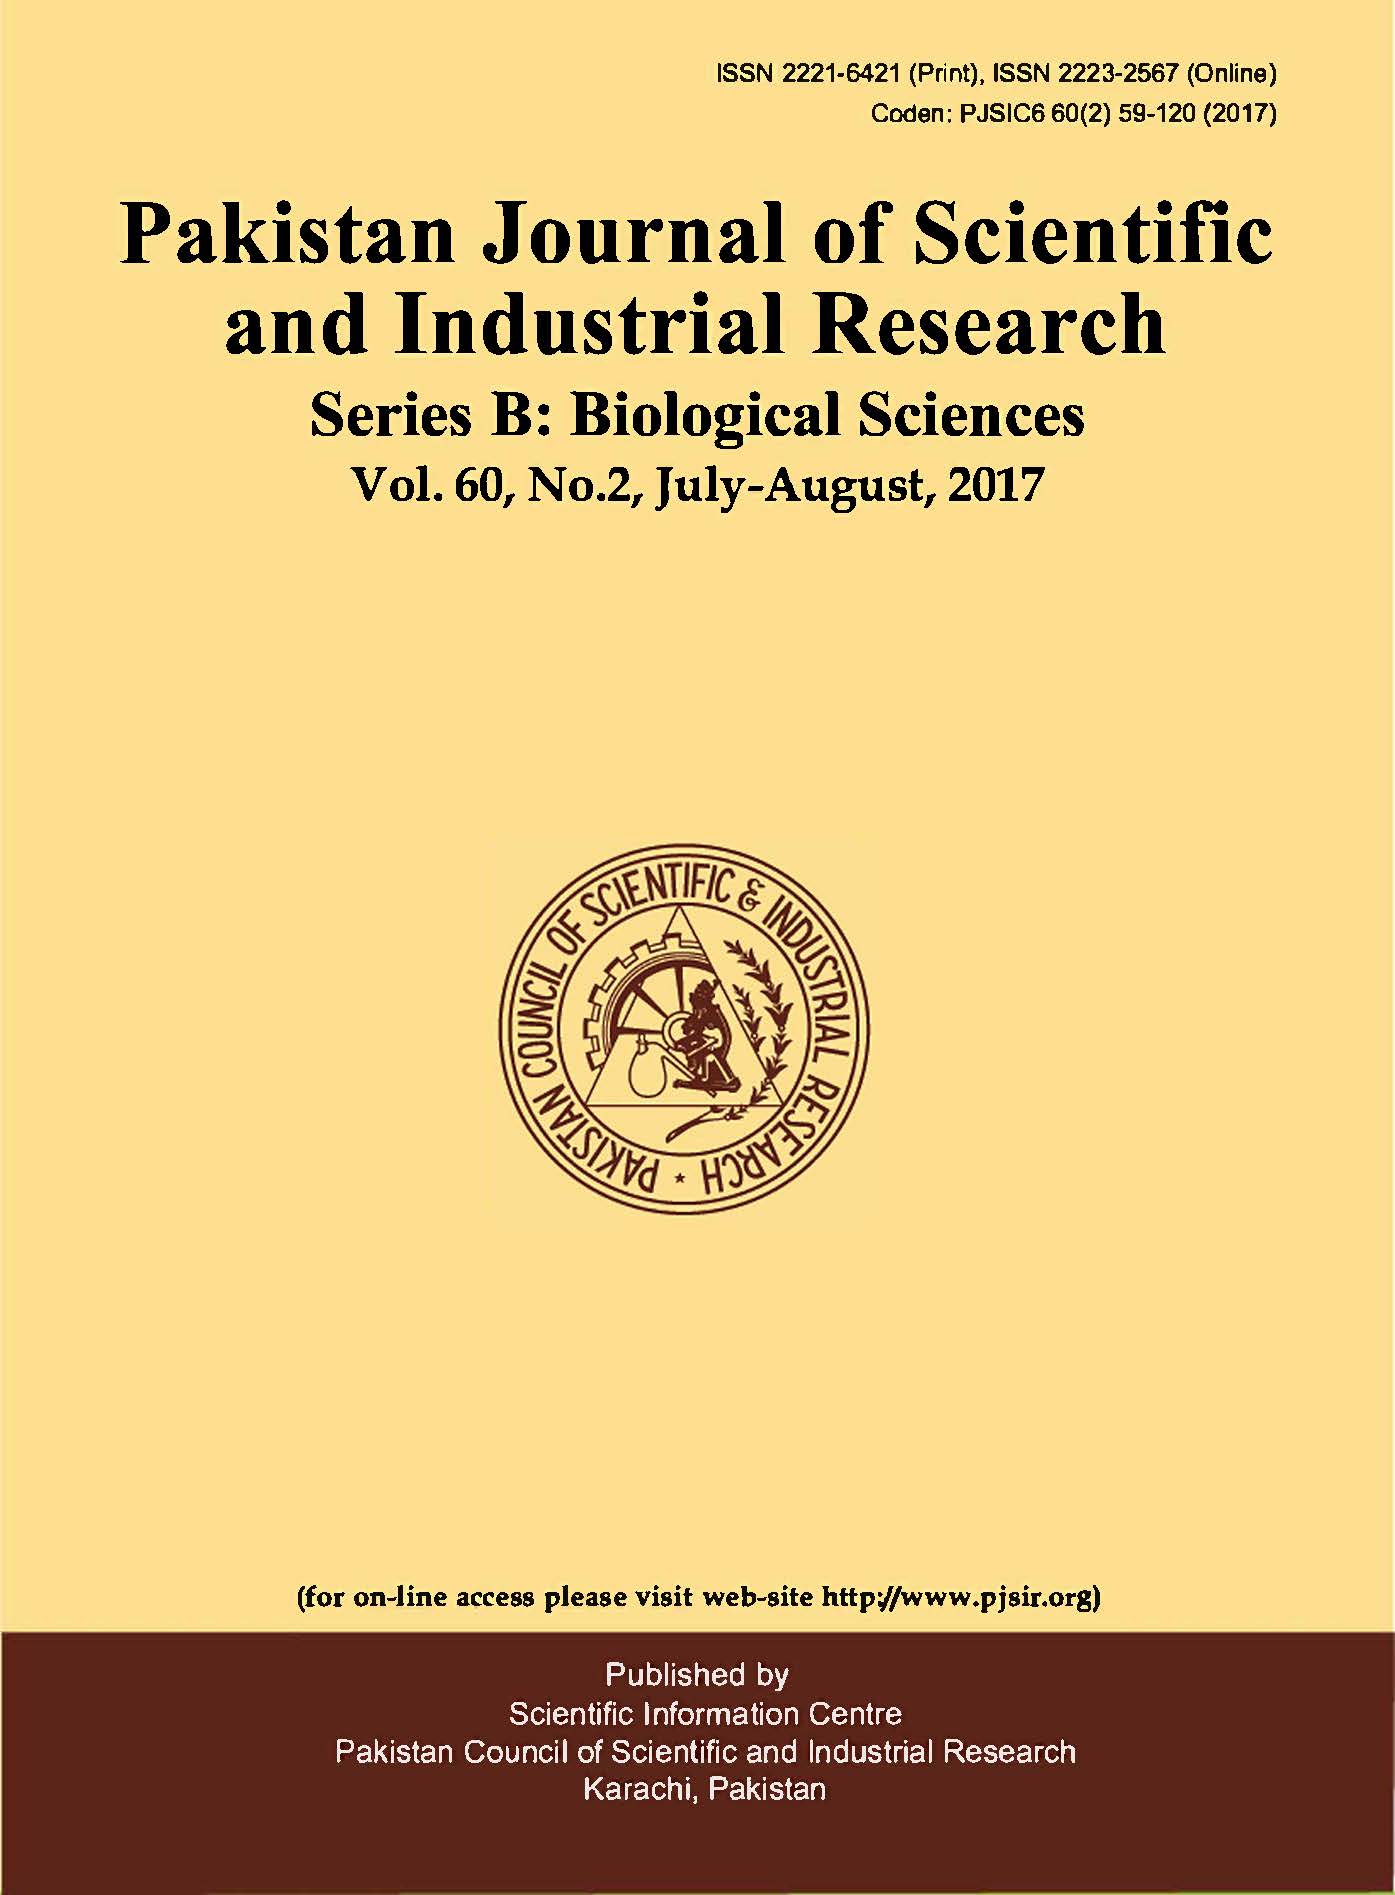 					View Vol. 60 No. 2 (2017): Pakistan Journal of Scientific and Industrial Research  Series B: Biological Sciences
				